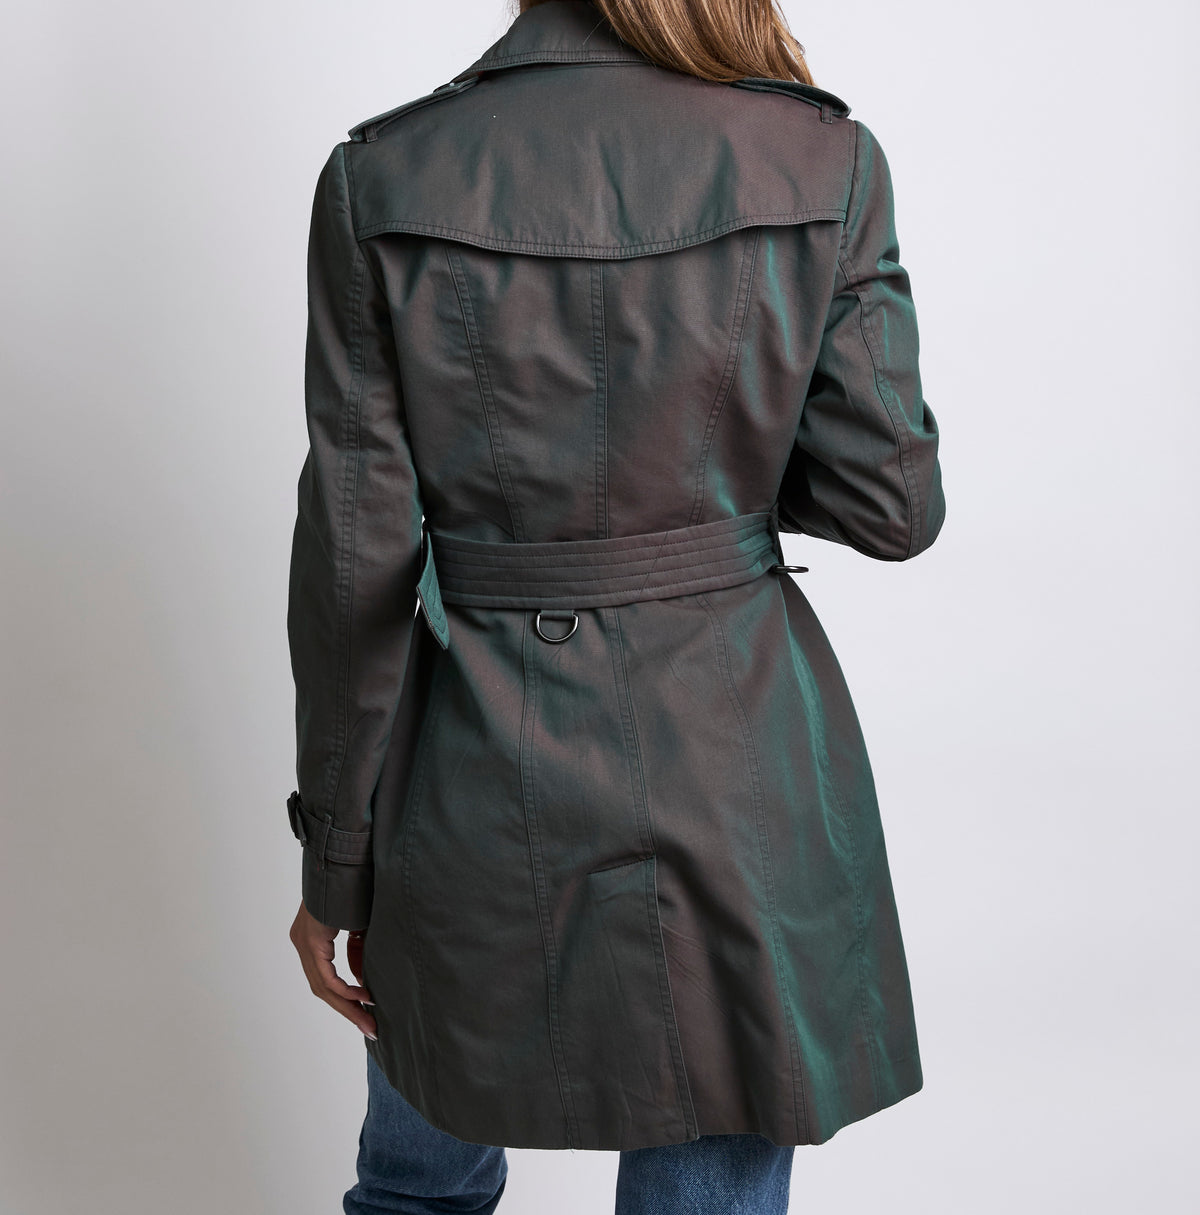 Burberry Double Breasted Olive Green Iridescent Trench Coat